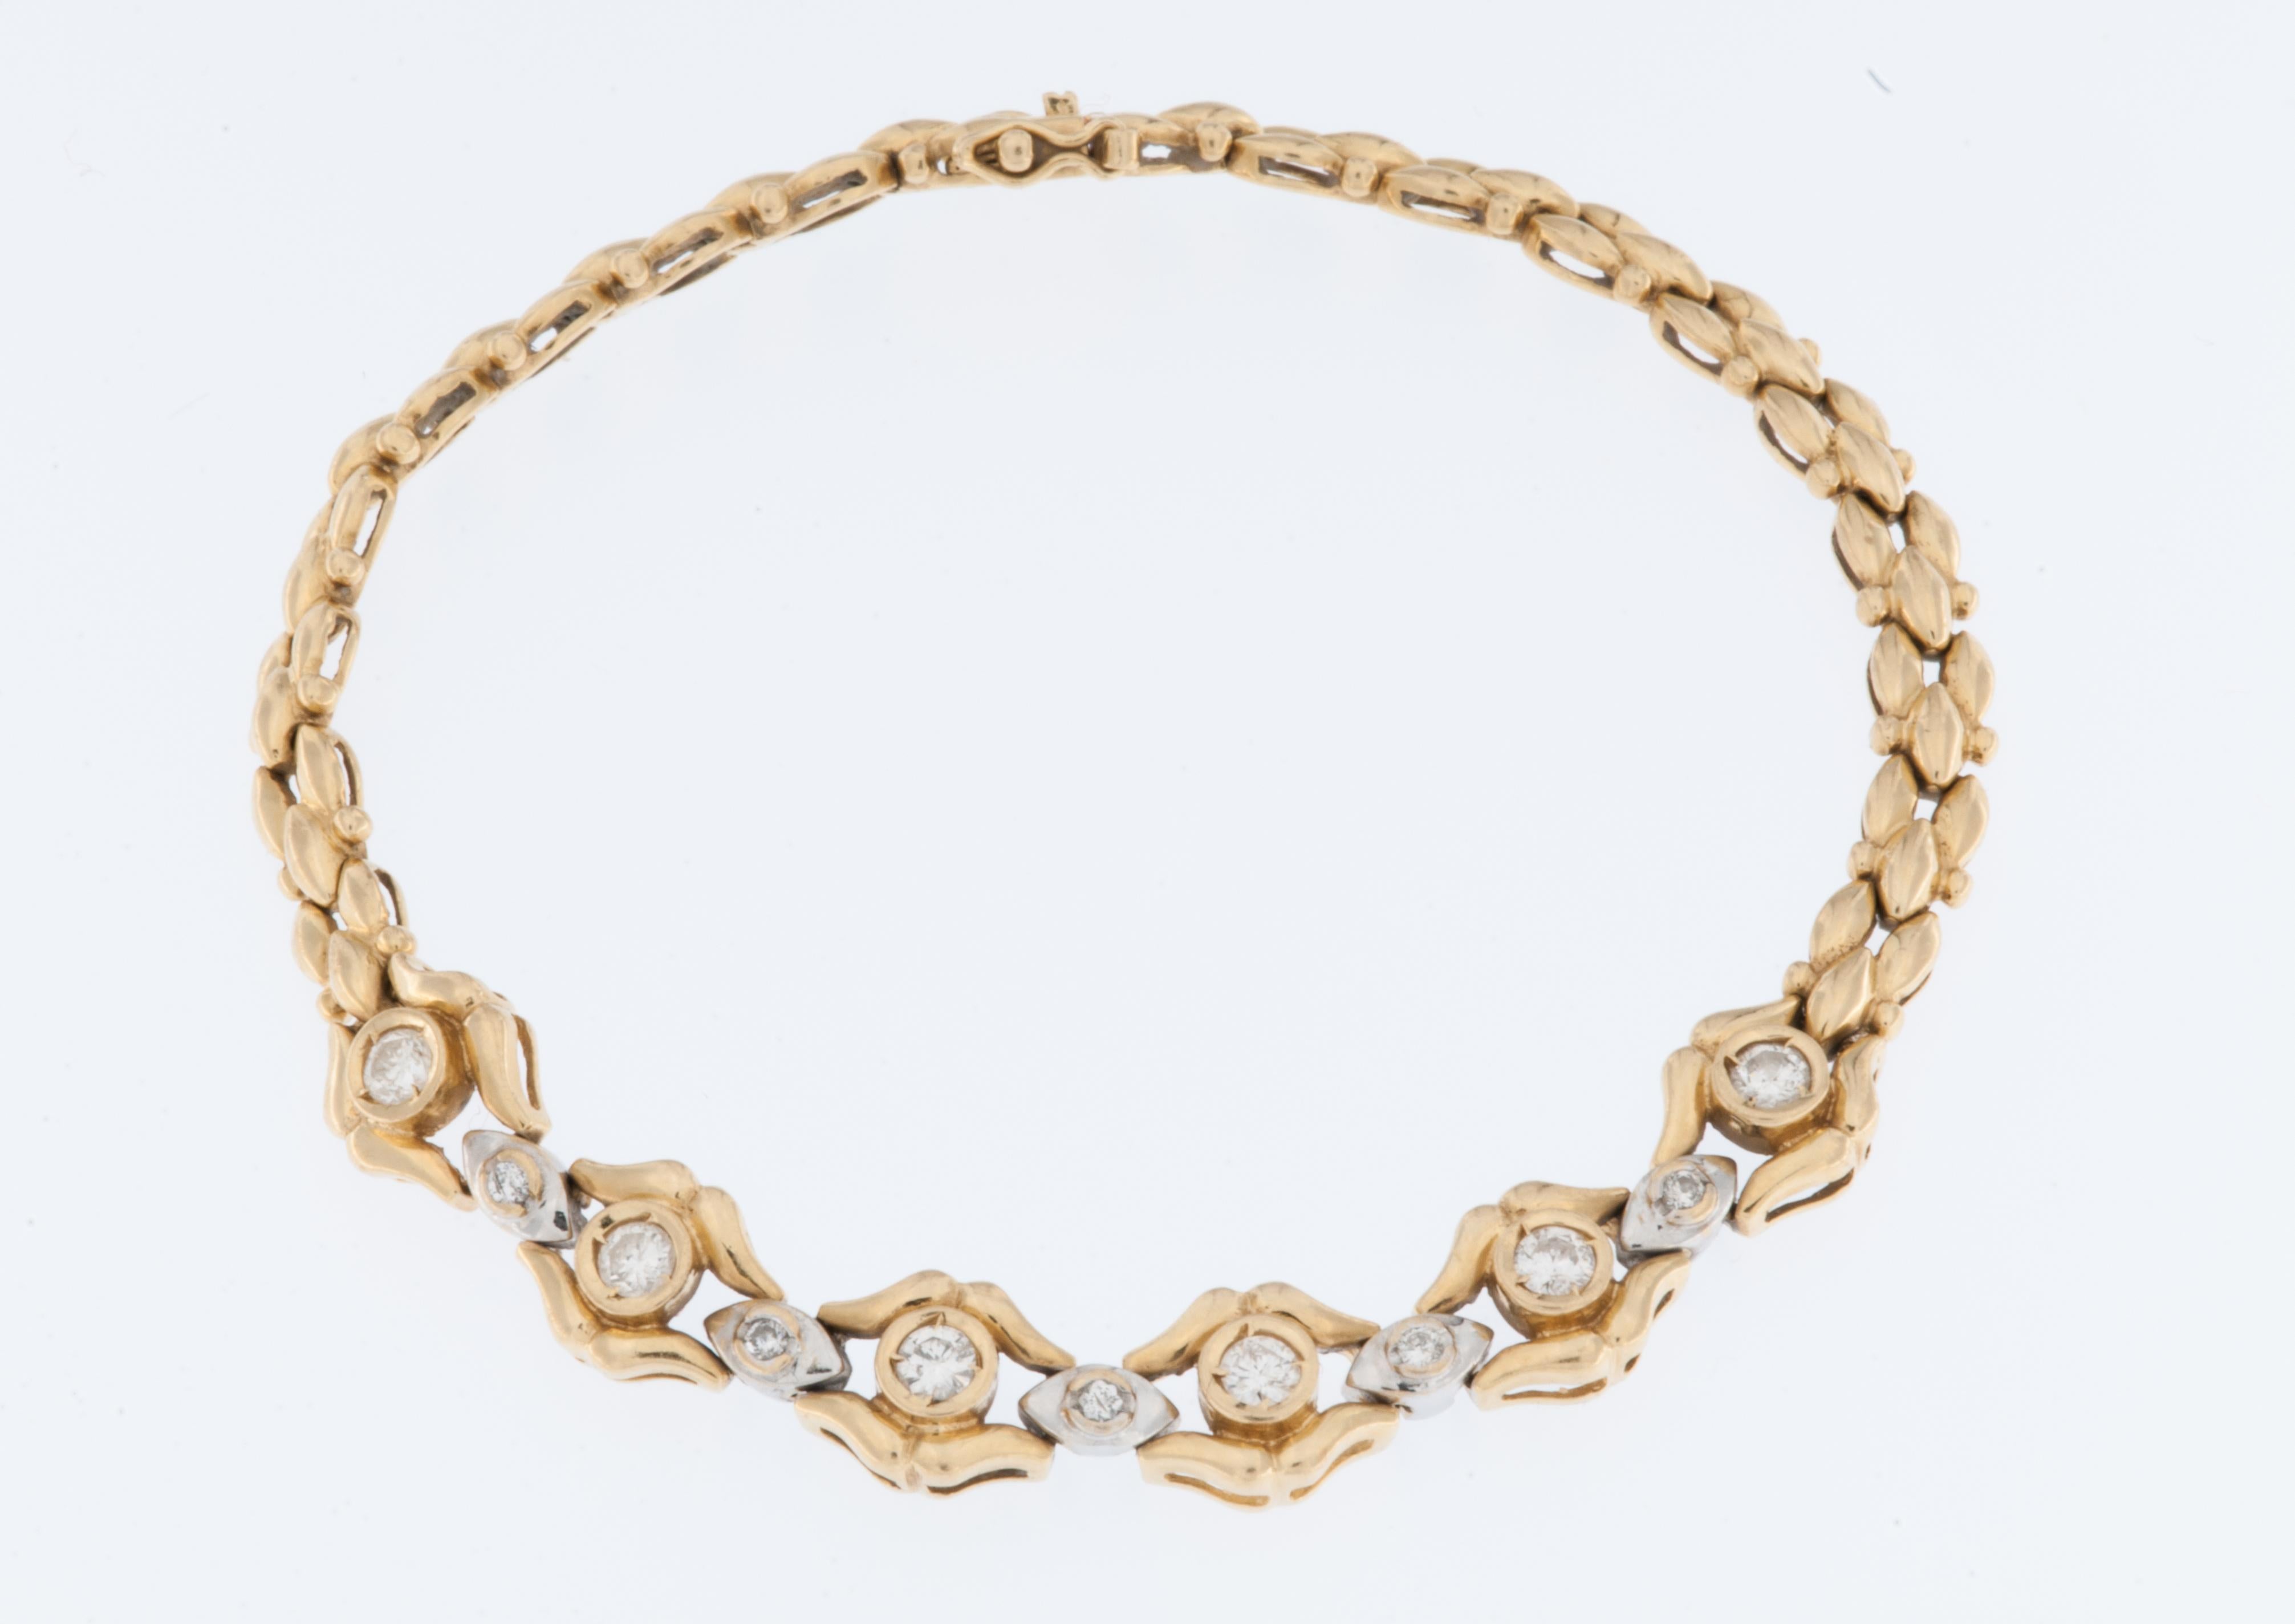 This Spanish 18kt Gold Bracelet with Diamonds is an exquisite piece of jewelry that exudes elegance and sophistication. 

The bracelet is crafted from 18-karat gold, which is renowned for its rich, warm color and durability. This high gold content